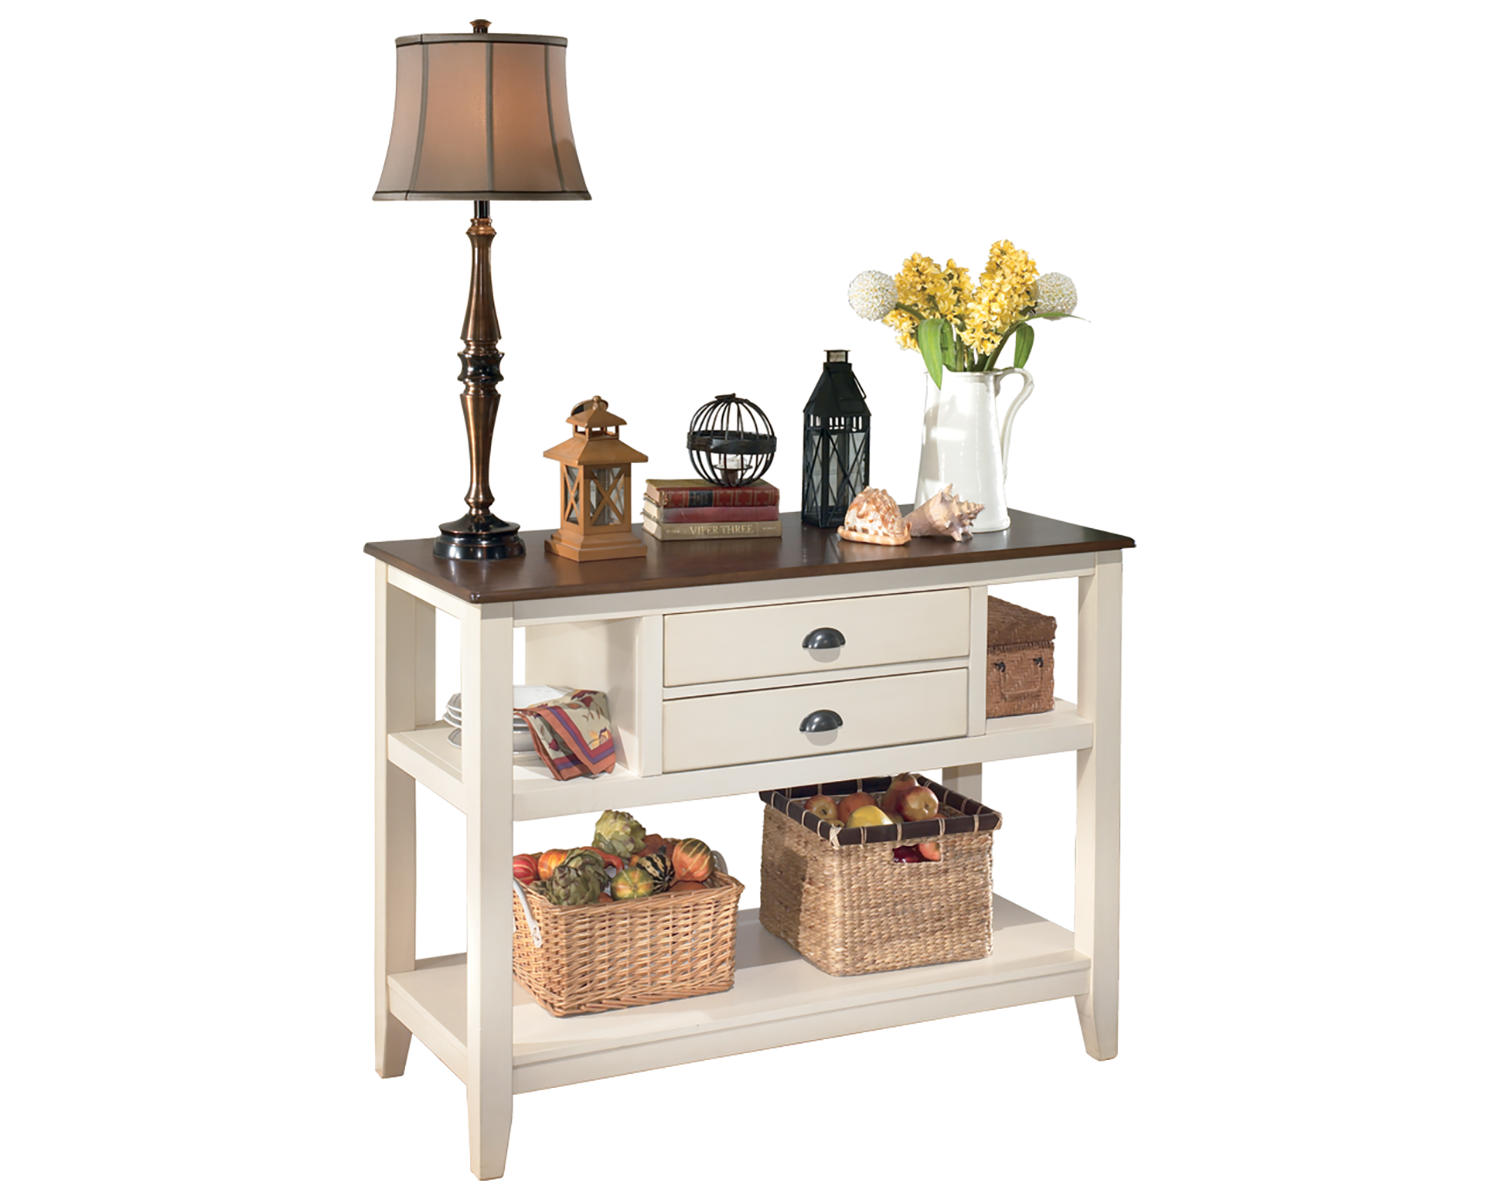 Signature Design by Ashley Whitesburg Dining 2 Drawer Server, Brown/Cottage White - image 1 of 4